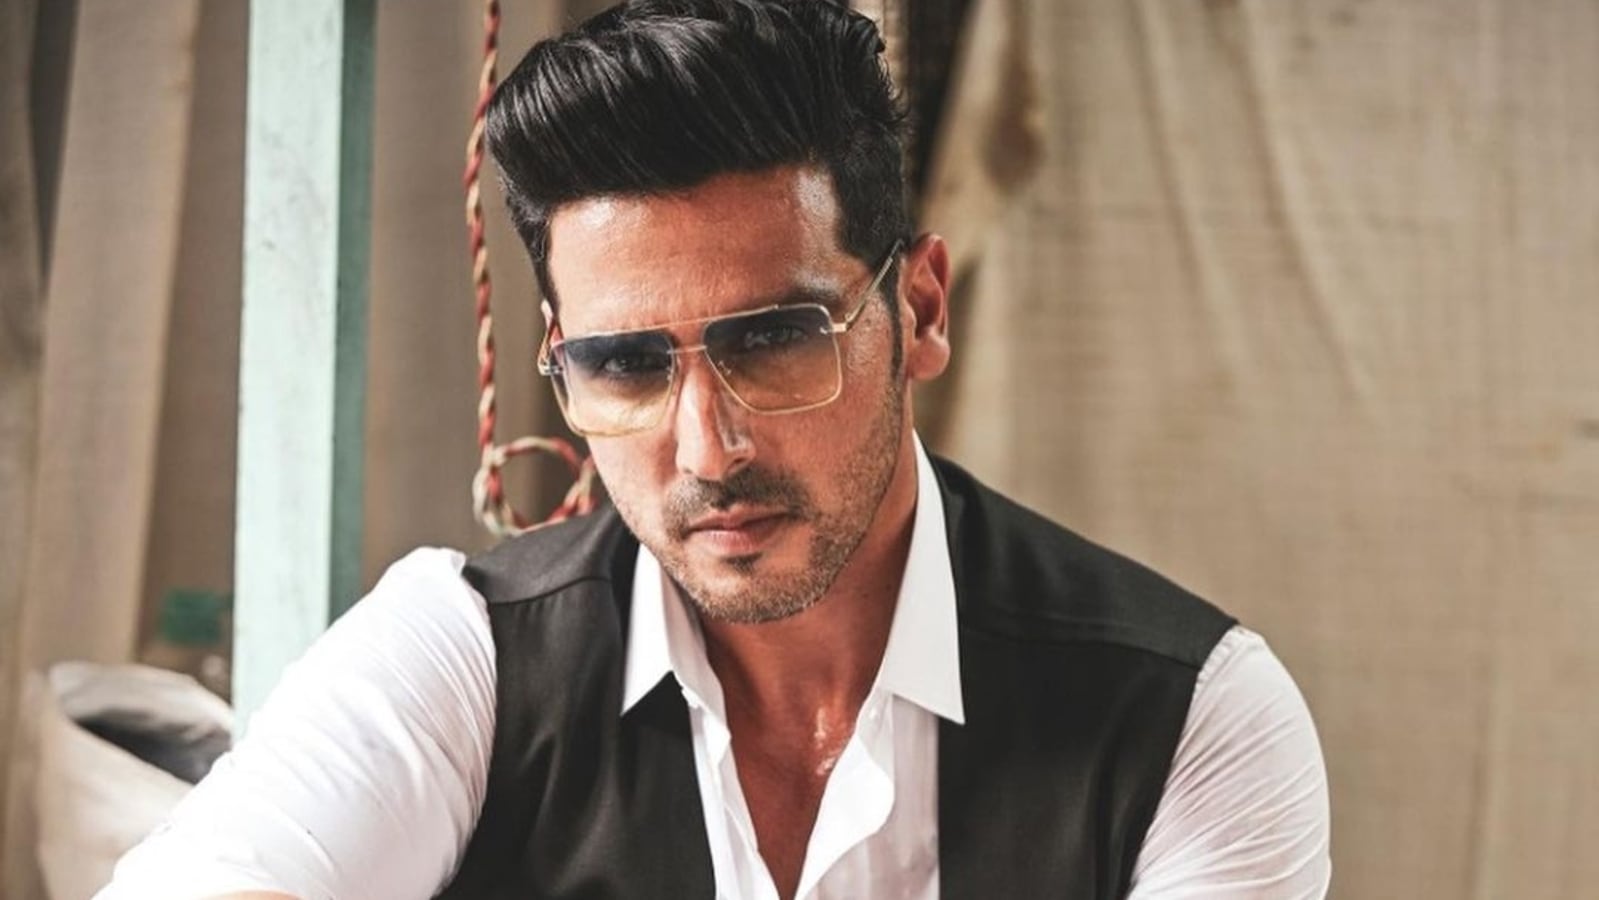 Zayed Khan birthday interview: Fardeen Khan has been through a lot in life. I’m proud of him